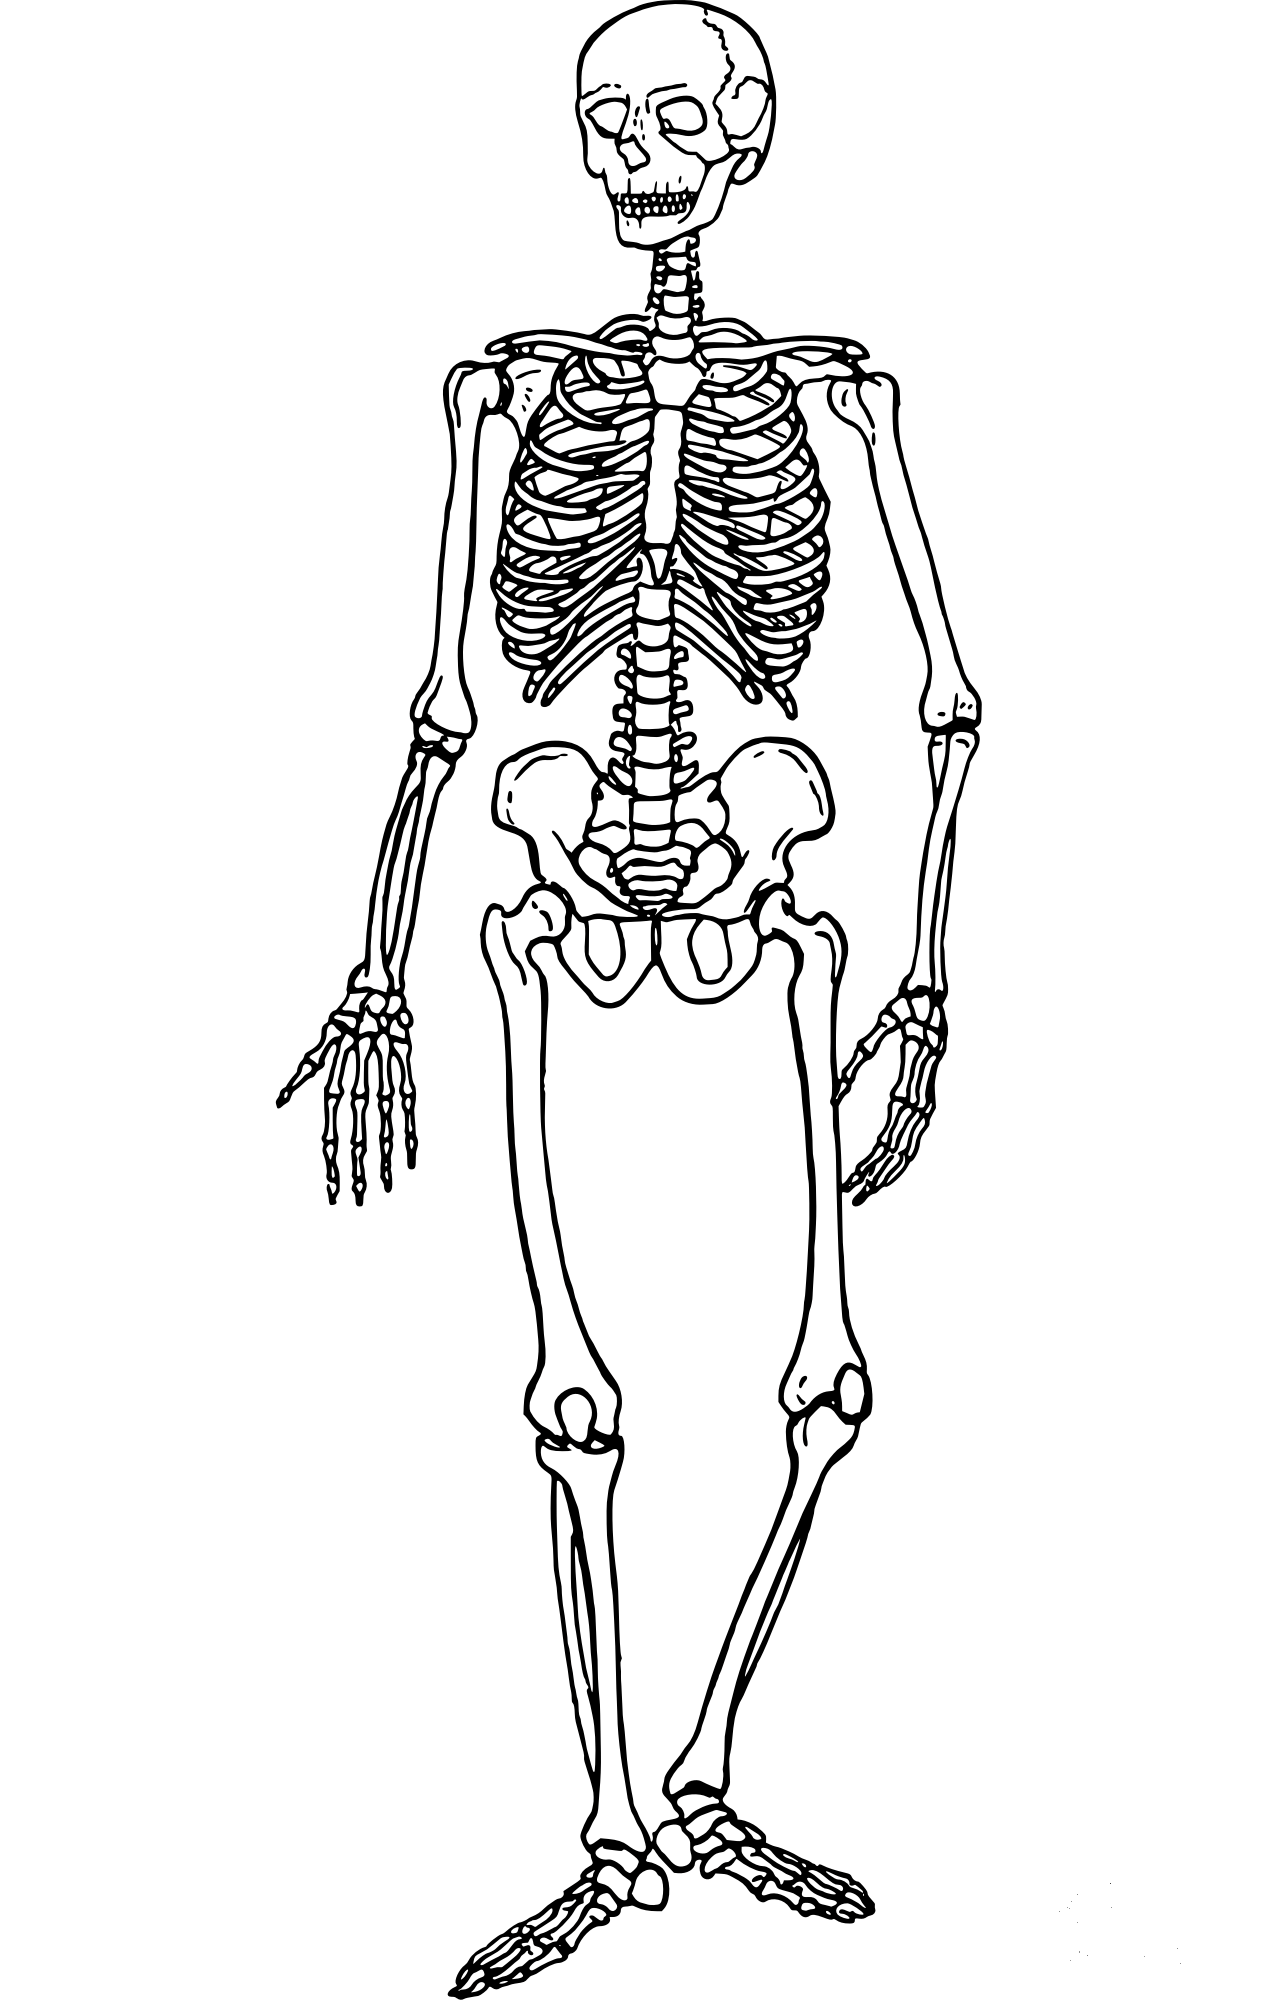 Vintage Skeleton coloring page - ColouringPages